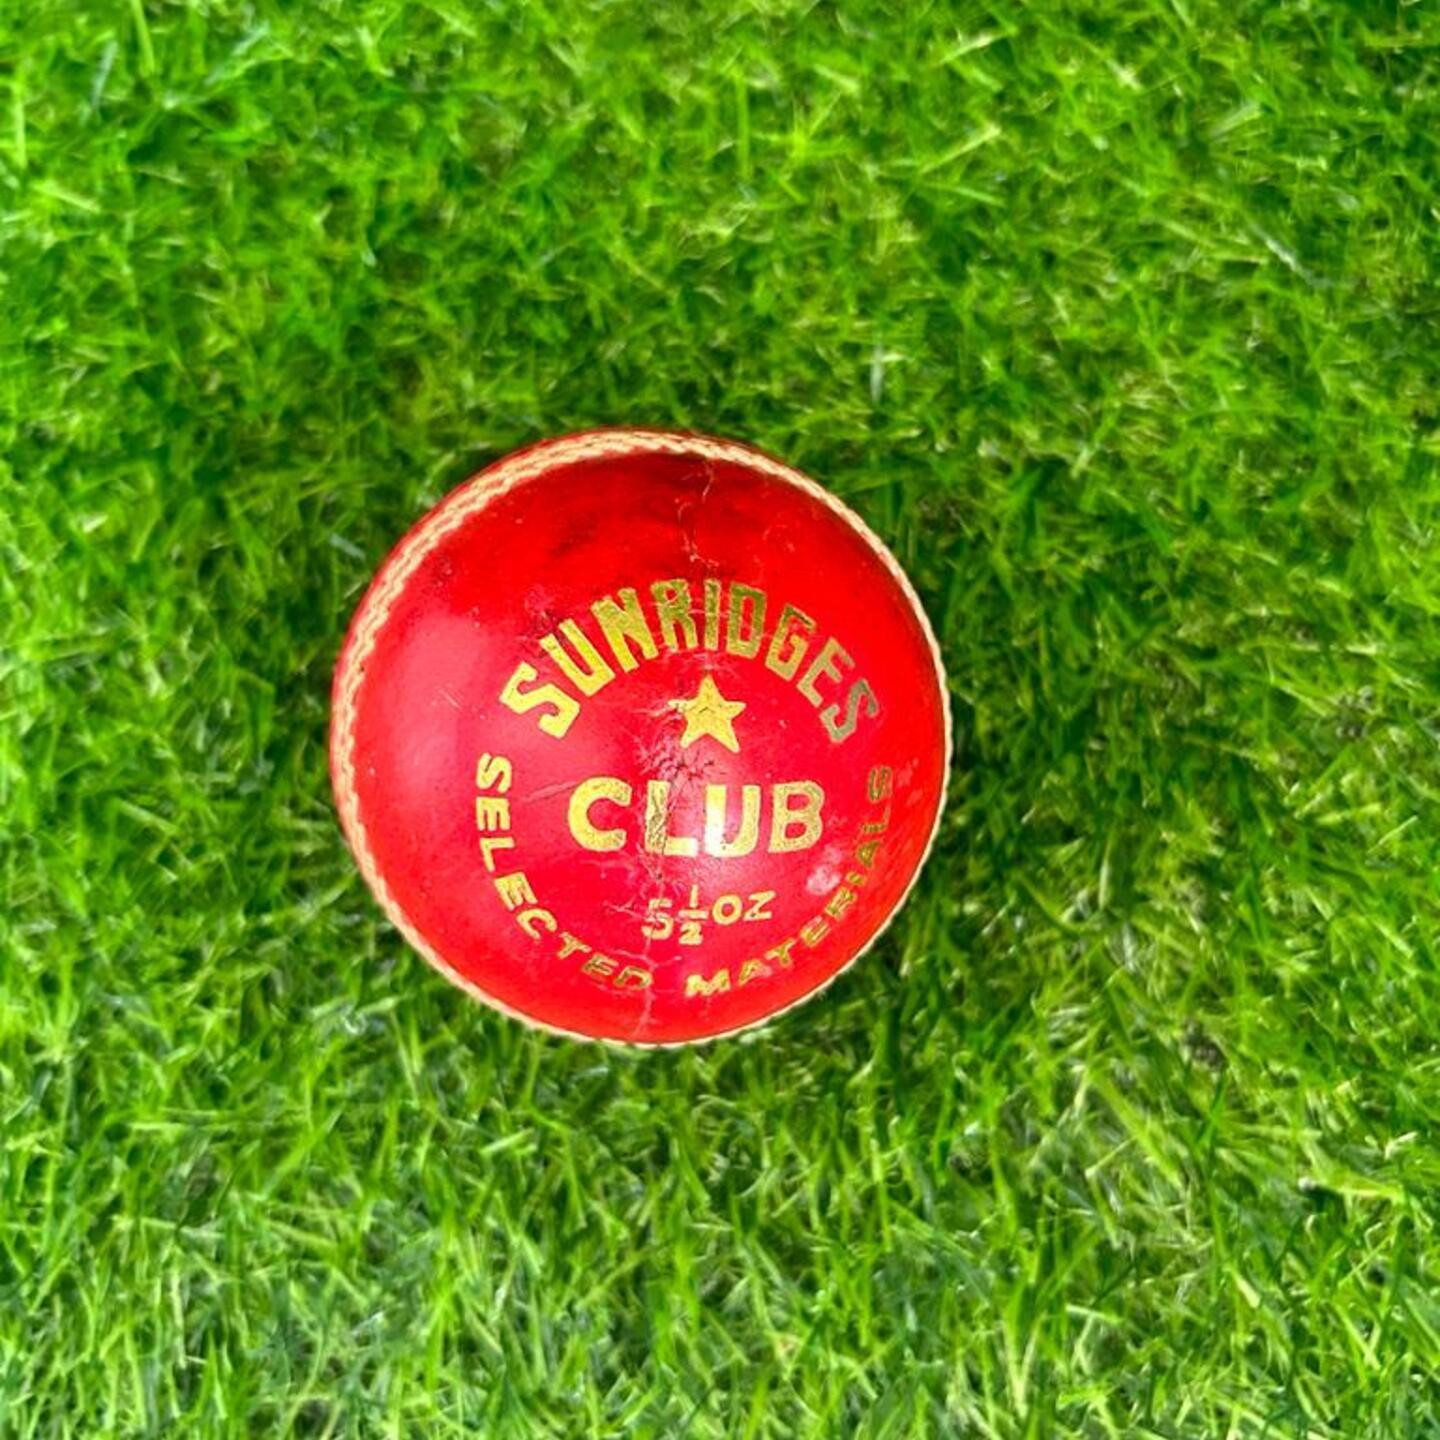 SS CLUB LEATHER CRICKET BALL  4 PC. RED CRICKET BALL